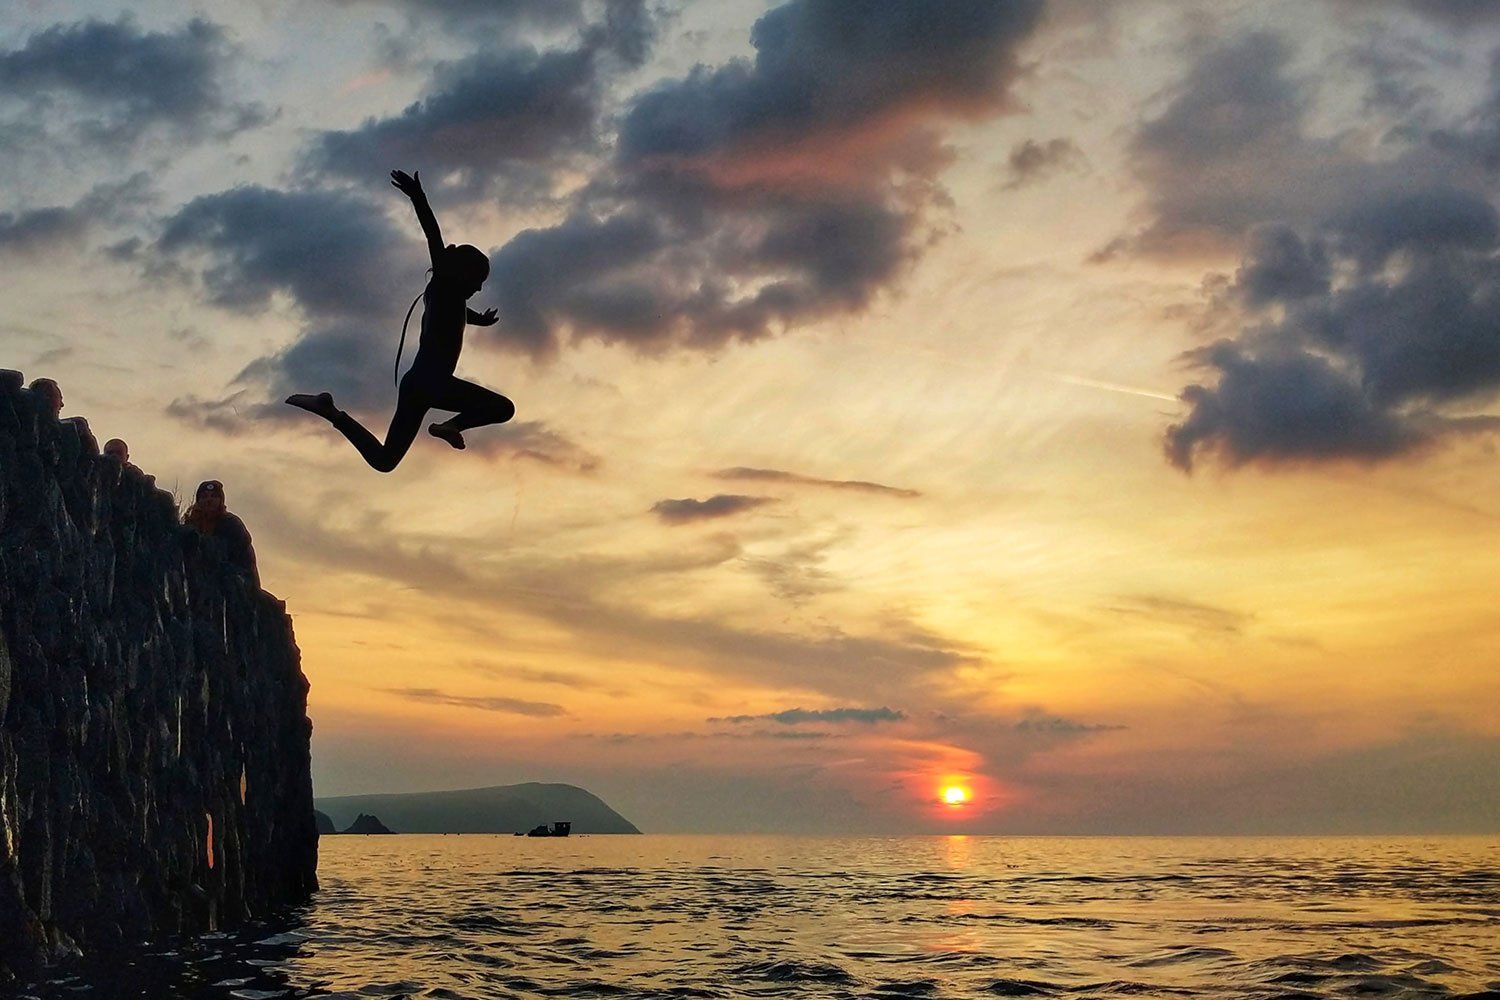 Girl jumping off a cliff into the water